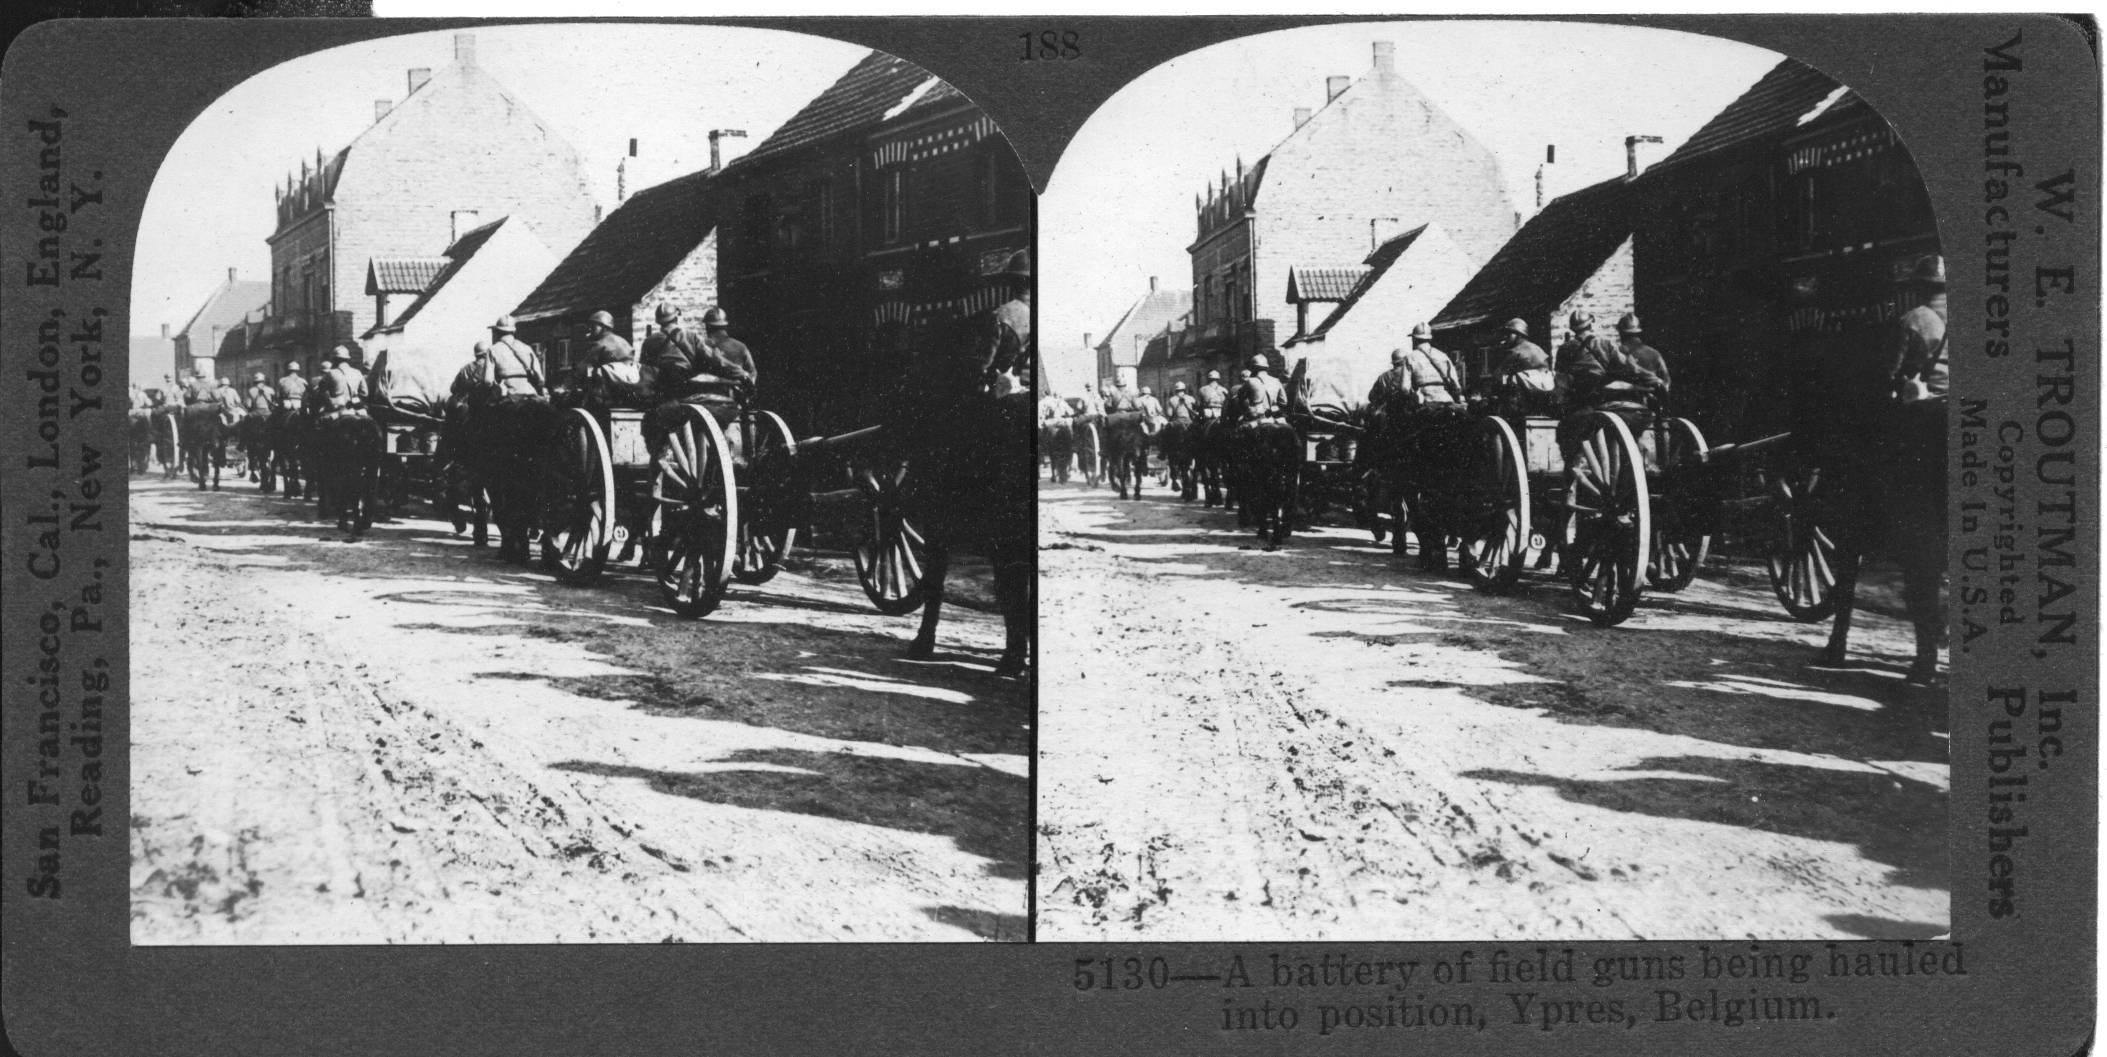 A battery of field guns being hauled into position, Ypres, Belgium